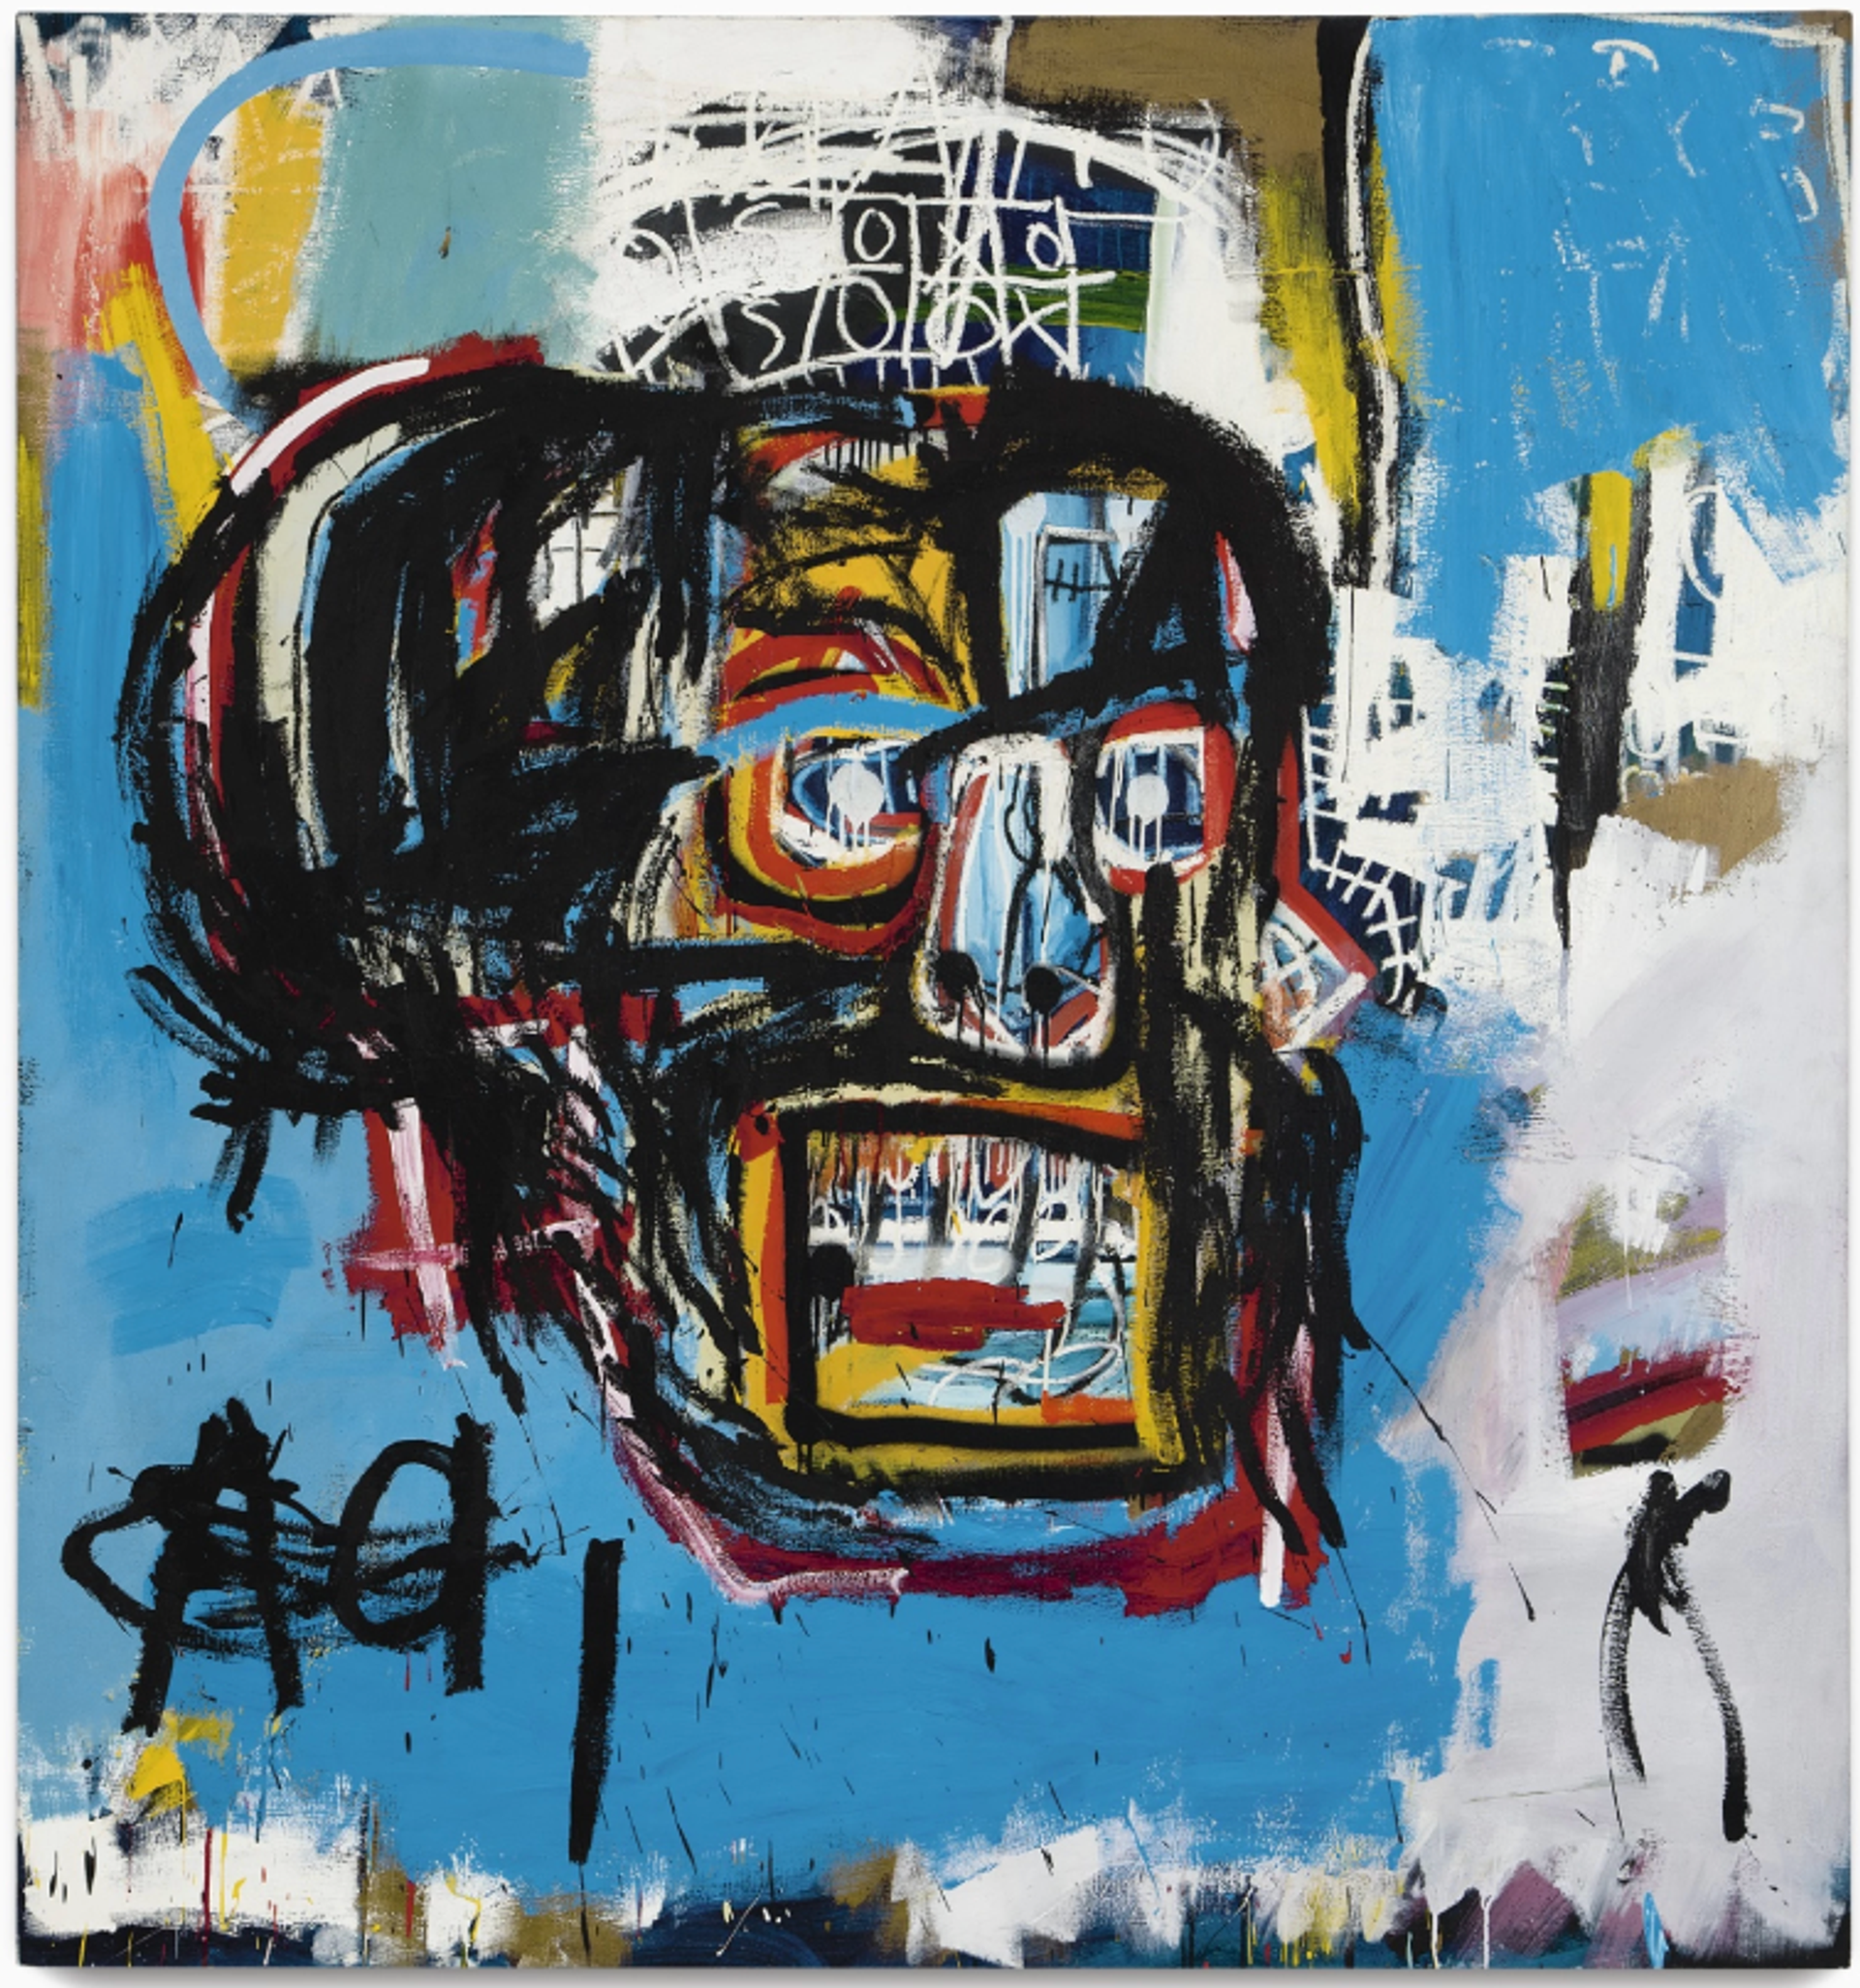 Untitled by Jean-Michel Basquiat - Sotheby's 1982